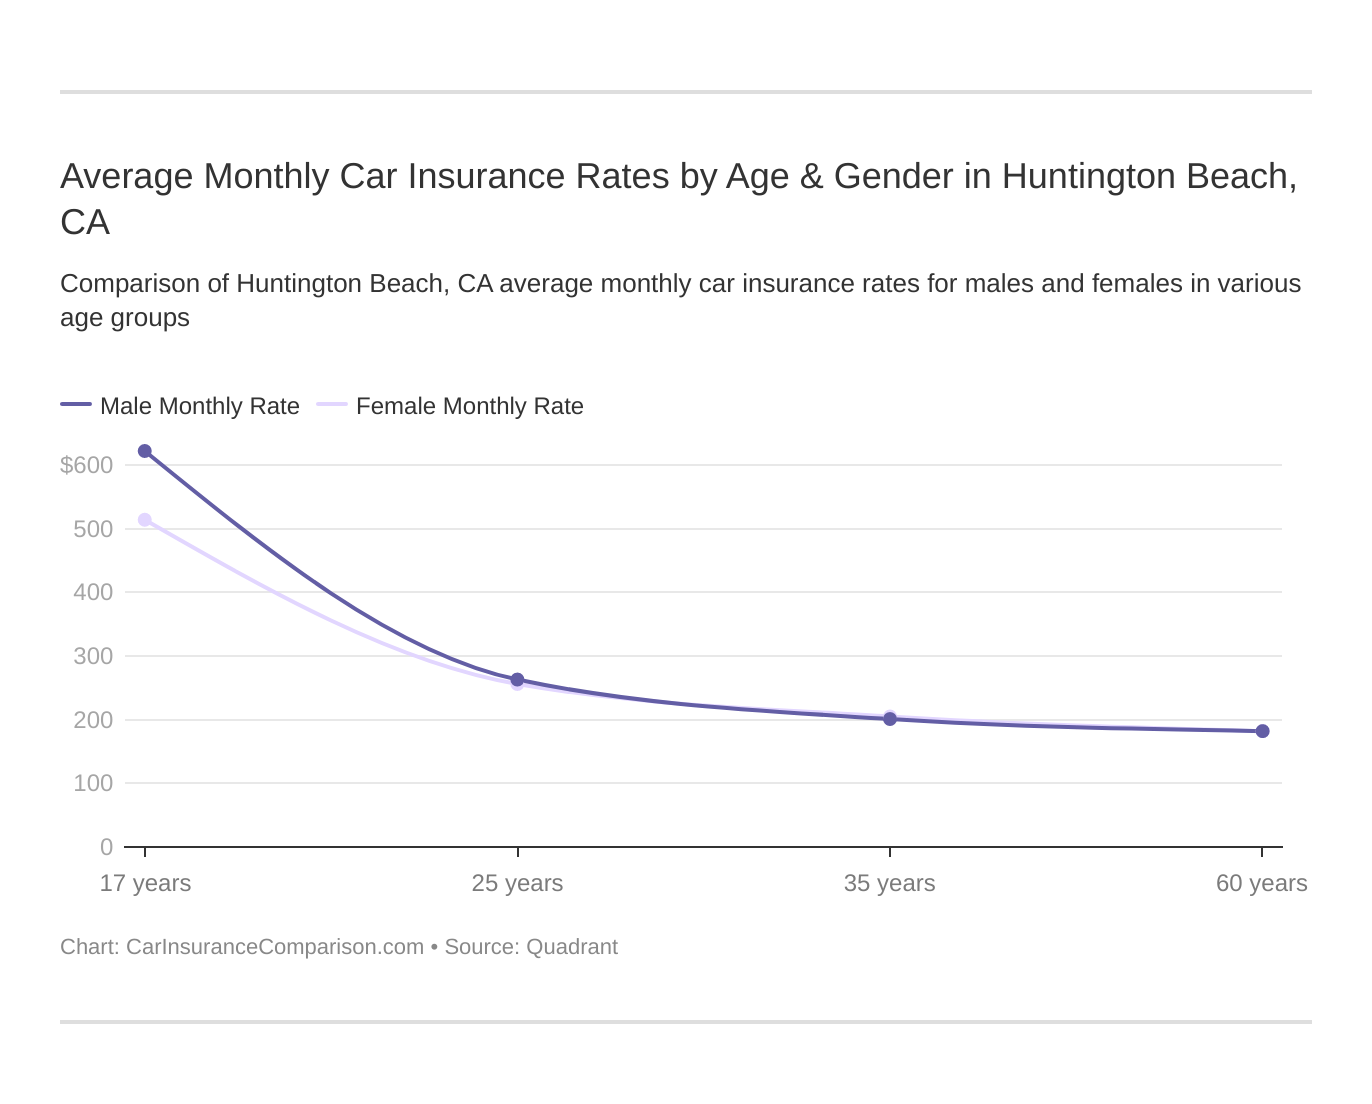 Average Monthly Car Insurance Rates by Age & Gender in Huntington Beach, CA